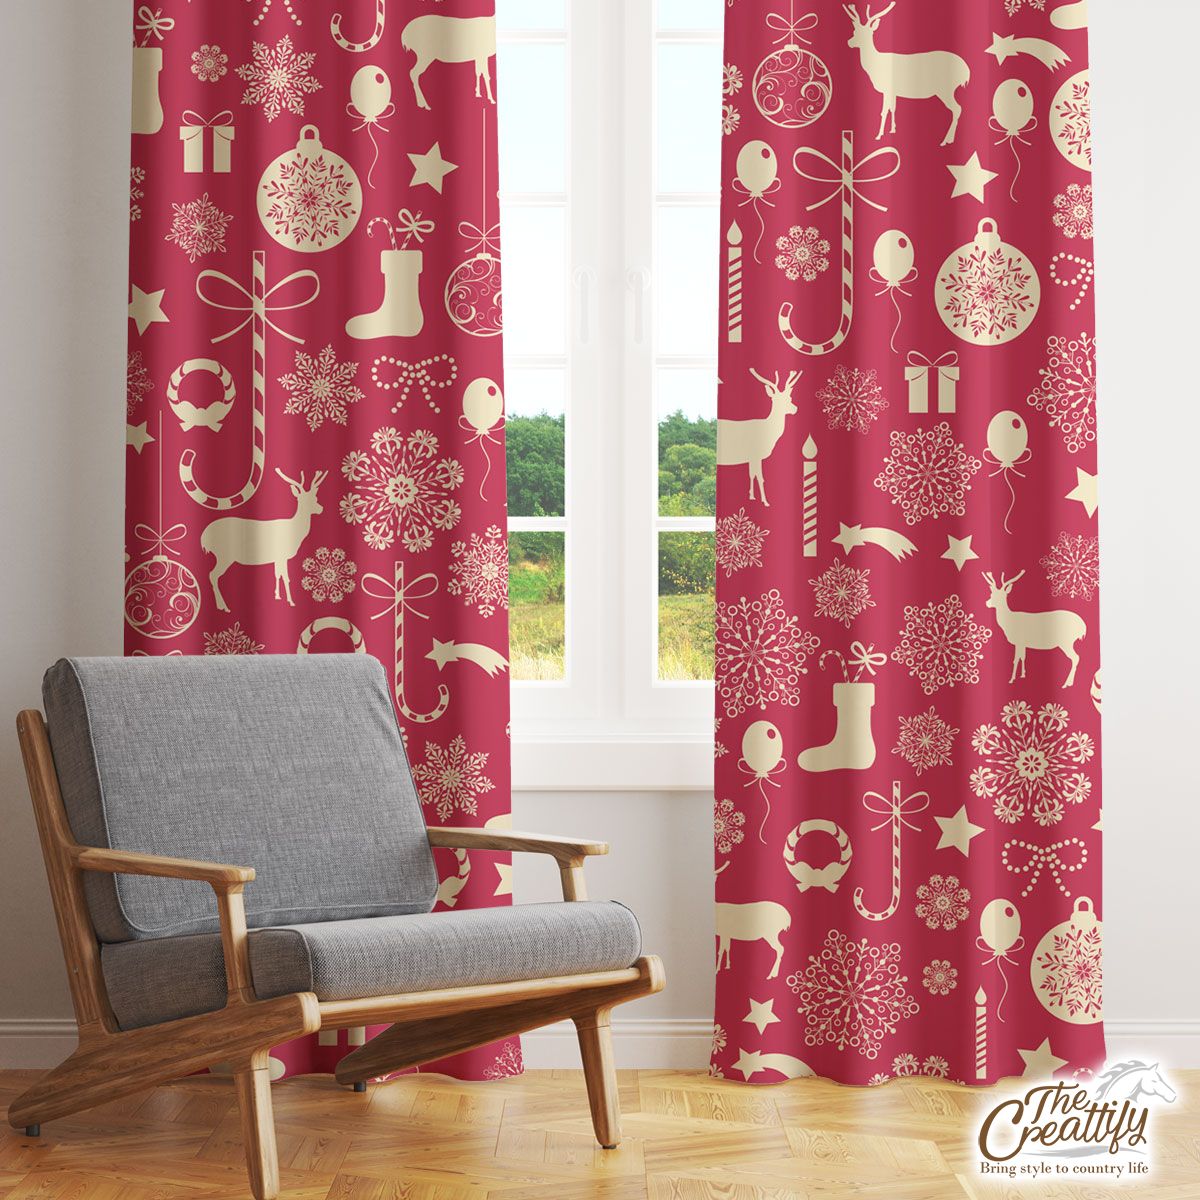 Happy Christmas With Reindeer, Christmas Balls, Socks, Candy Canes On Snowflake Background Window Curtain